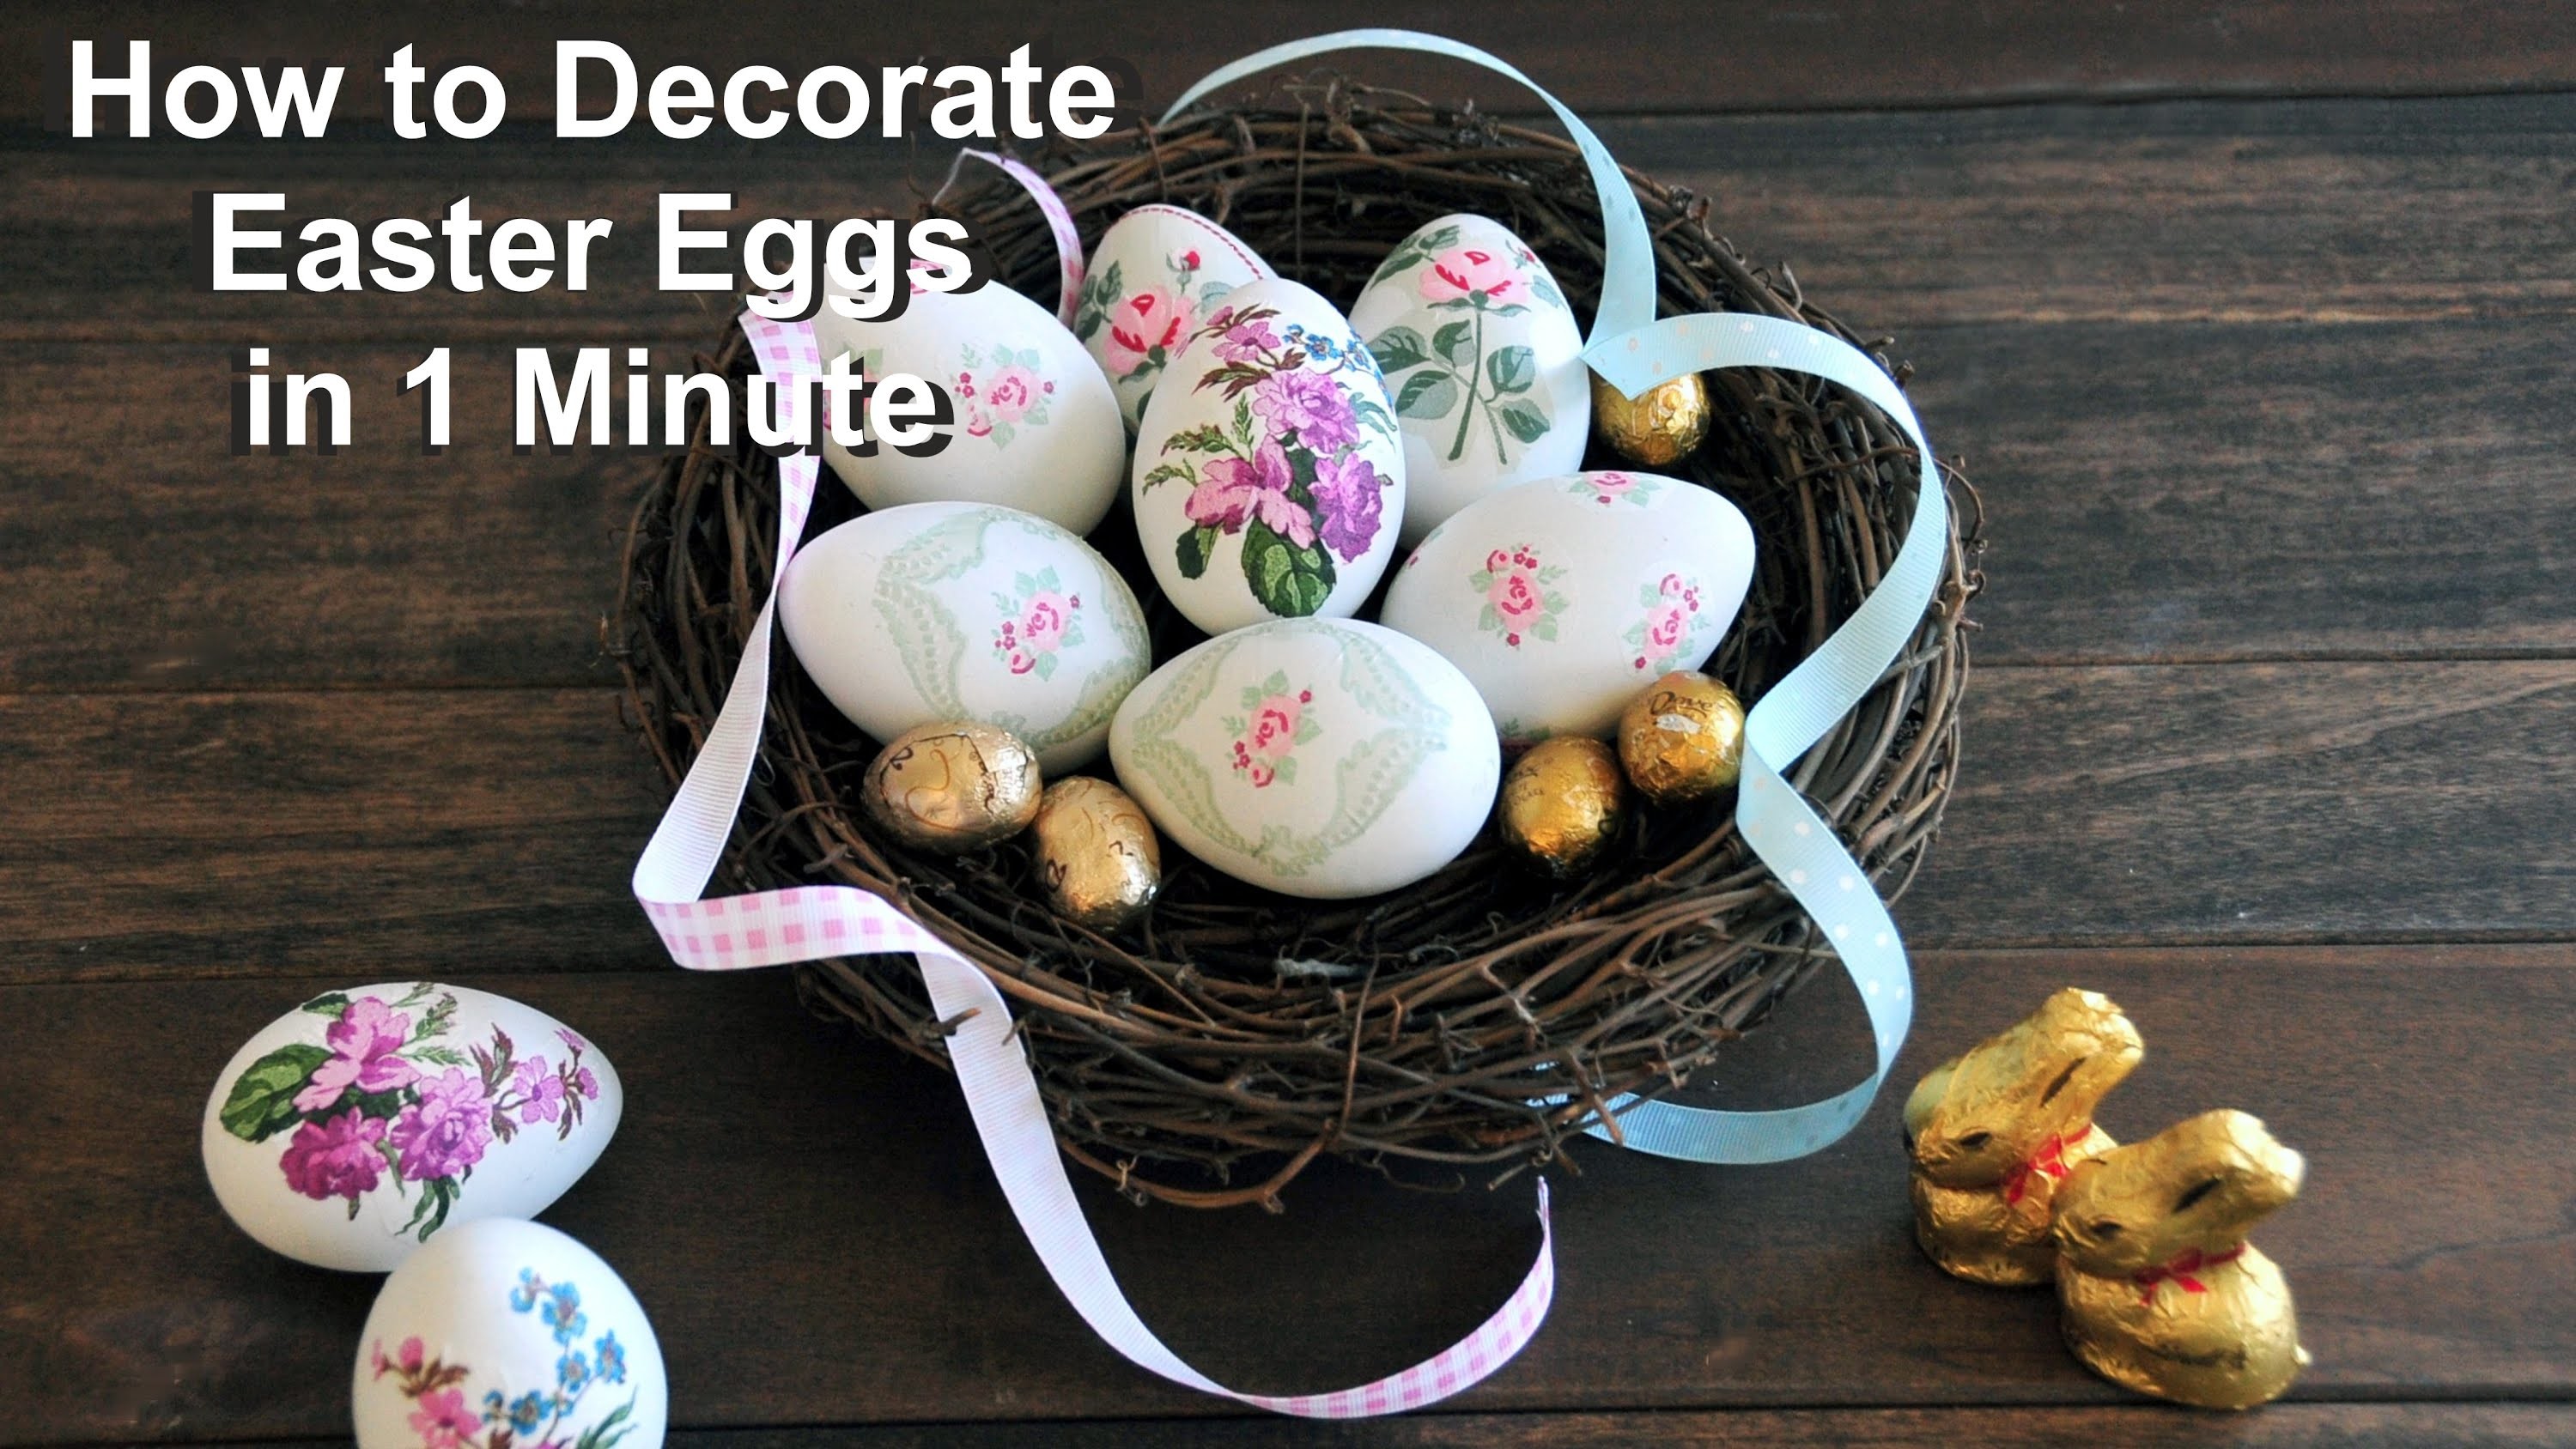 How to Decorate Easter Eggs in 1 Minute